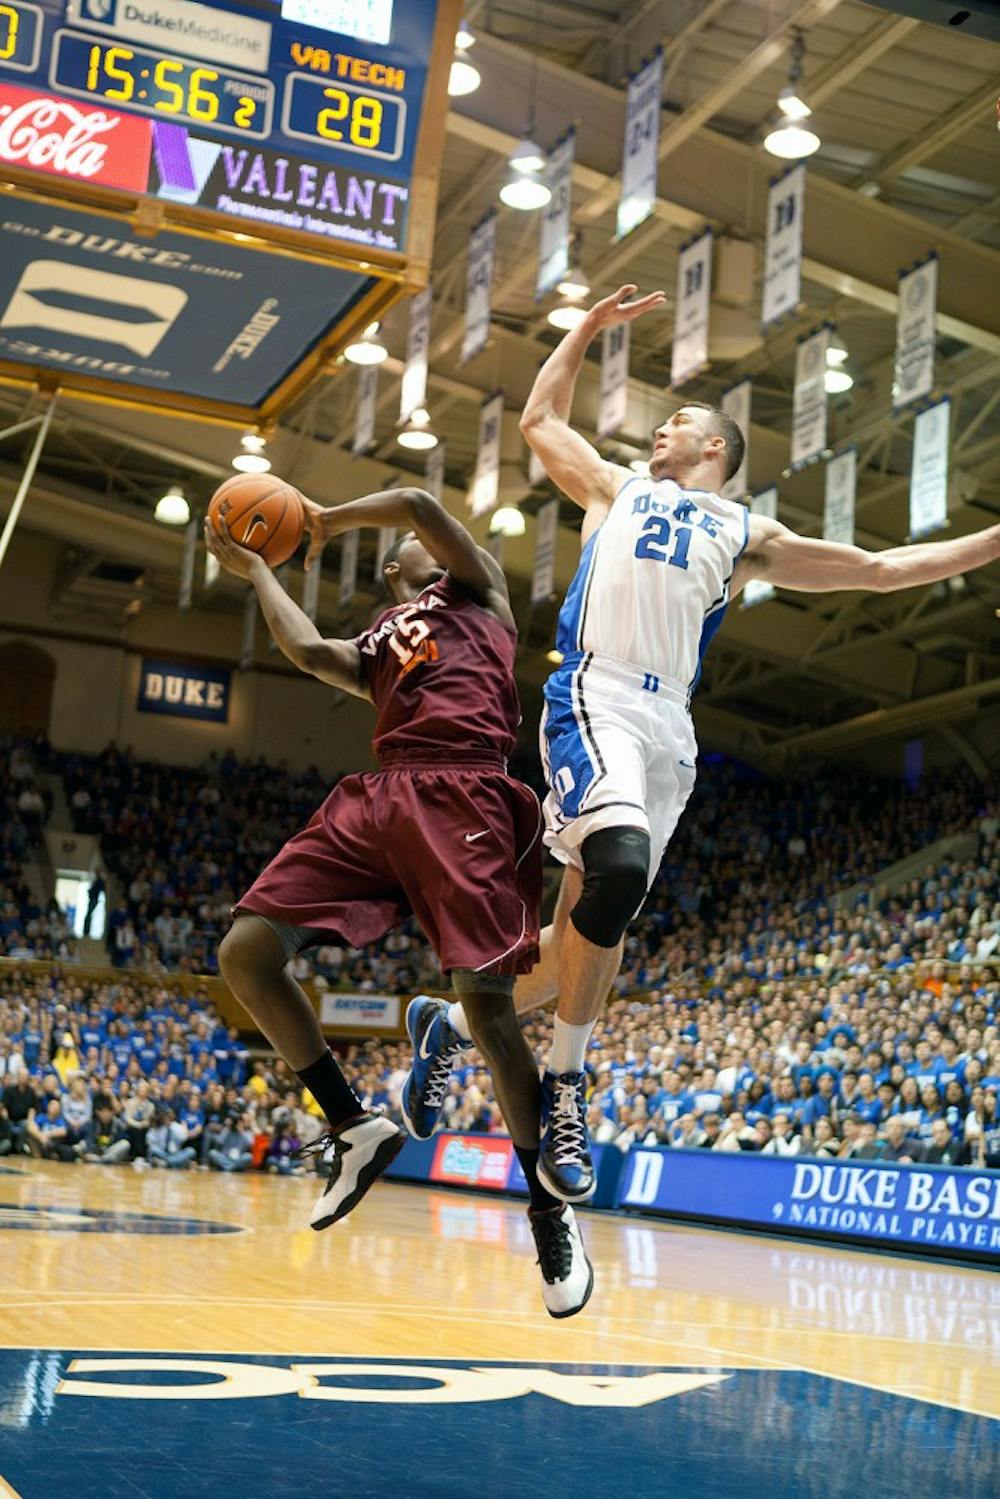 Miles Plumlee had 15 rebounds in the Blue Devils' win over the Hokies Saturday.